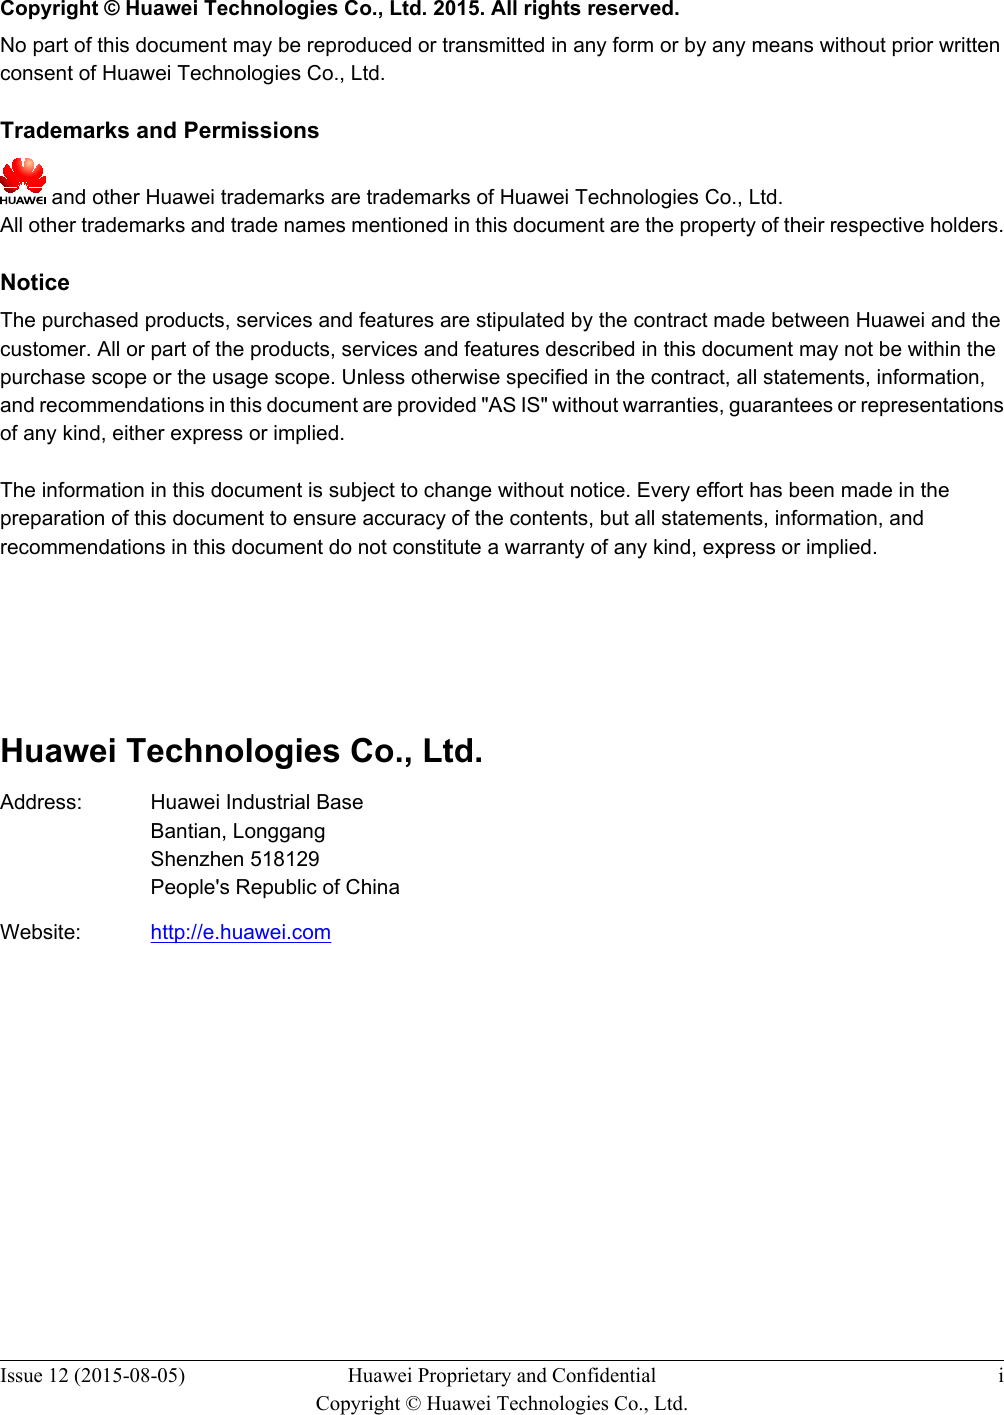   Copyright © Huawei Technologies Co., Ltd. 2015. All rights reserved.No part of this document may be reproduced or transmitted in any form or by any means without prior writtenconsent of Huawei Technologies Co., Ltd. Trademarks and Permissions and other Huawei trademarks are trademarks of Huawei Technologies Co., Ltd.All other trademarks and trade names mentioned in this document are the property of their respective holders. NoticeThe purchased products, services and features are stipulated by the contract made between Huawei and thecustomer. All or part of the products, services and features described in this document may not be within thepurchase scope or the usage scope. Unless otherwise specified in the contract, all statements, information,and recommendations in this document are provided &quot;AS IS&quot; without warranties, guarantees or representationsof any kind, either express or implied.The information in this document is subject to change without notice. Every effort has been made in thepreparation of this document to ensure accuracy of the contents, but all statements, information, andrecommendations in this document do not constitute a warranty of any kind, express or implied.       Huawei Technologies Co., Ltd.Address: Huawei Industrial BaseBantian, LonggangShenzhen 518129People&apos;s Republic of ChinaWebsite: http://e.huawei.comIssue 12 (2015-08-05) Huawei Proprietary and ConfidentialCopyright © Huawei Technologies Co., Ltd.i